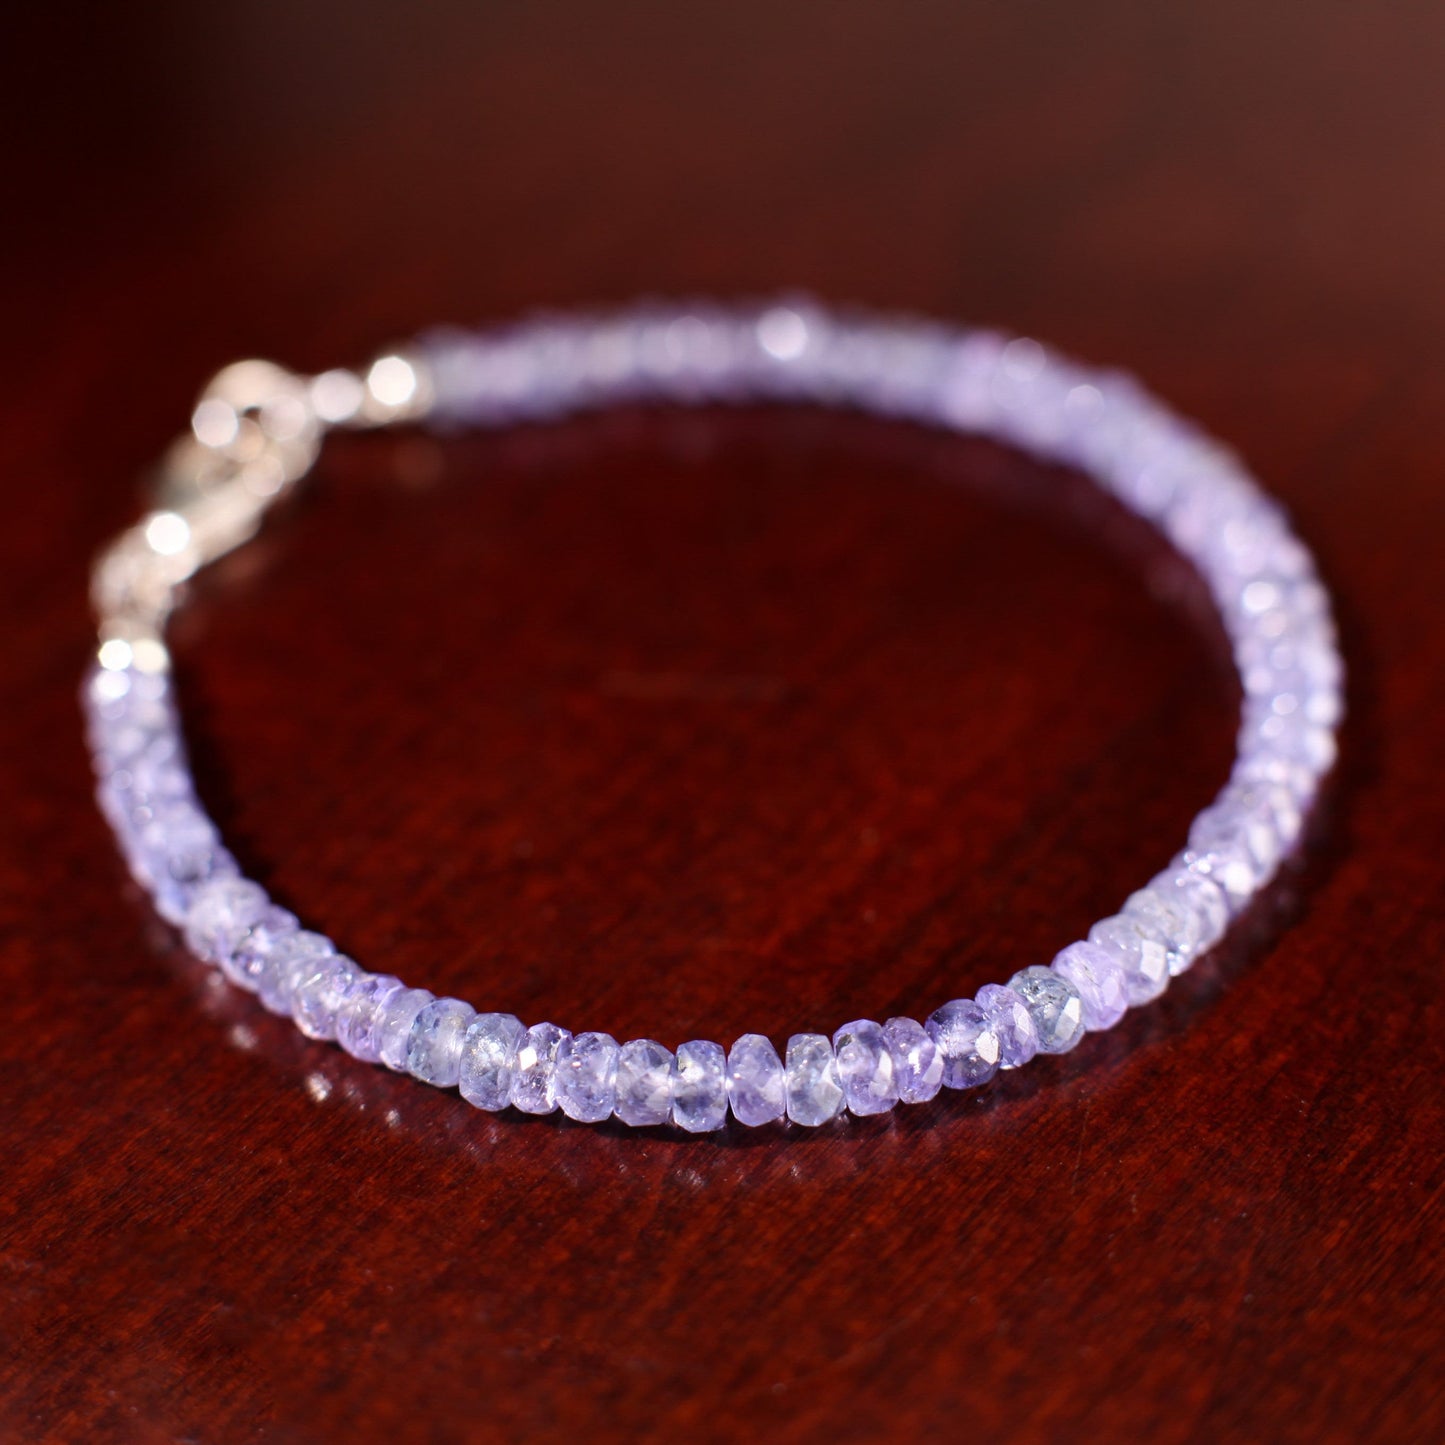 Tanzanite Faceted 4mm Rondelle Gemstone Bracelet in 925 Sterling Silver or 14K Gold Filled Clasp, Precious Gift for her